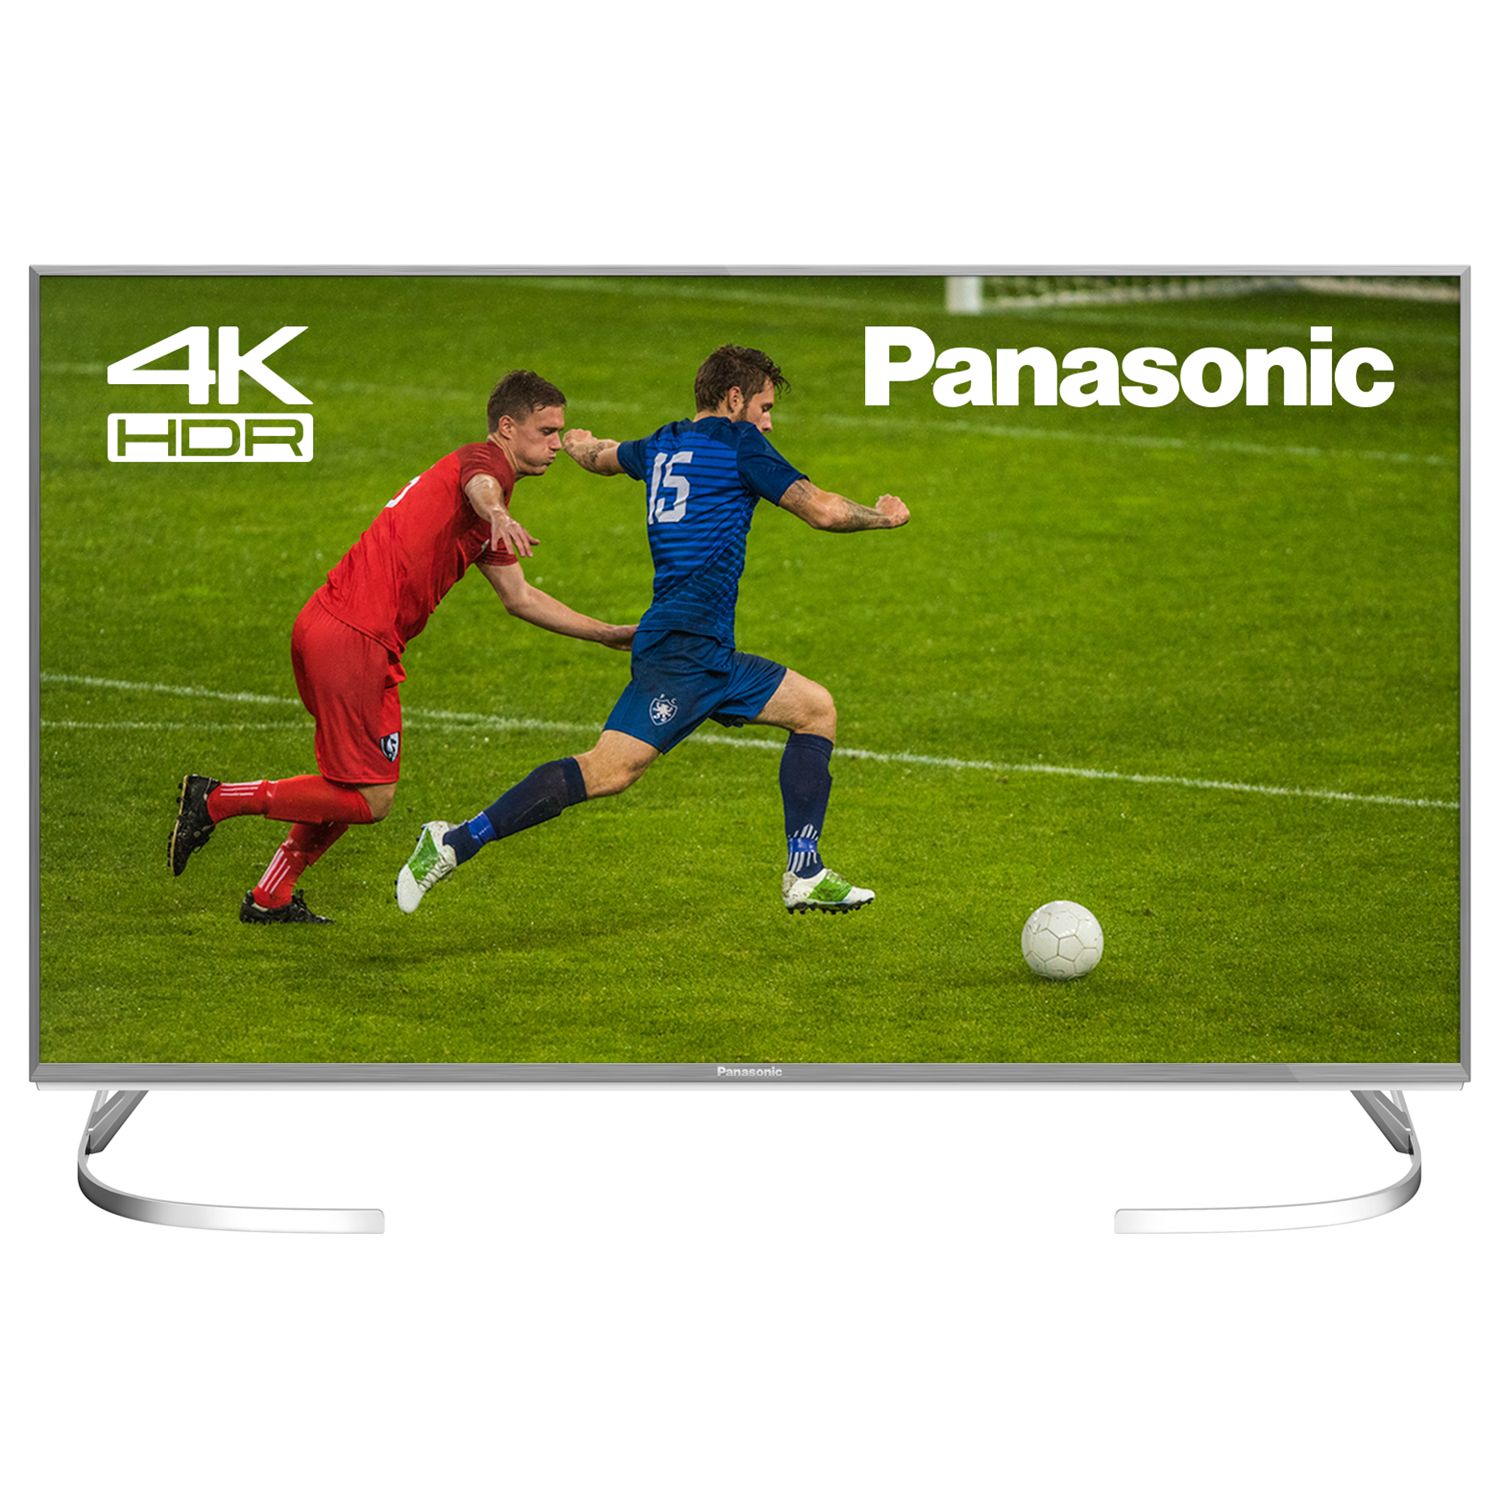 Panasonic TX-50EX700B LED HDR 4K Ultra HD Smart TV, 50" with Freeview Play, Slim Metallic Bezel & Switch Design Adjustable Stand, Ultra HD Certified, Silver